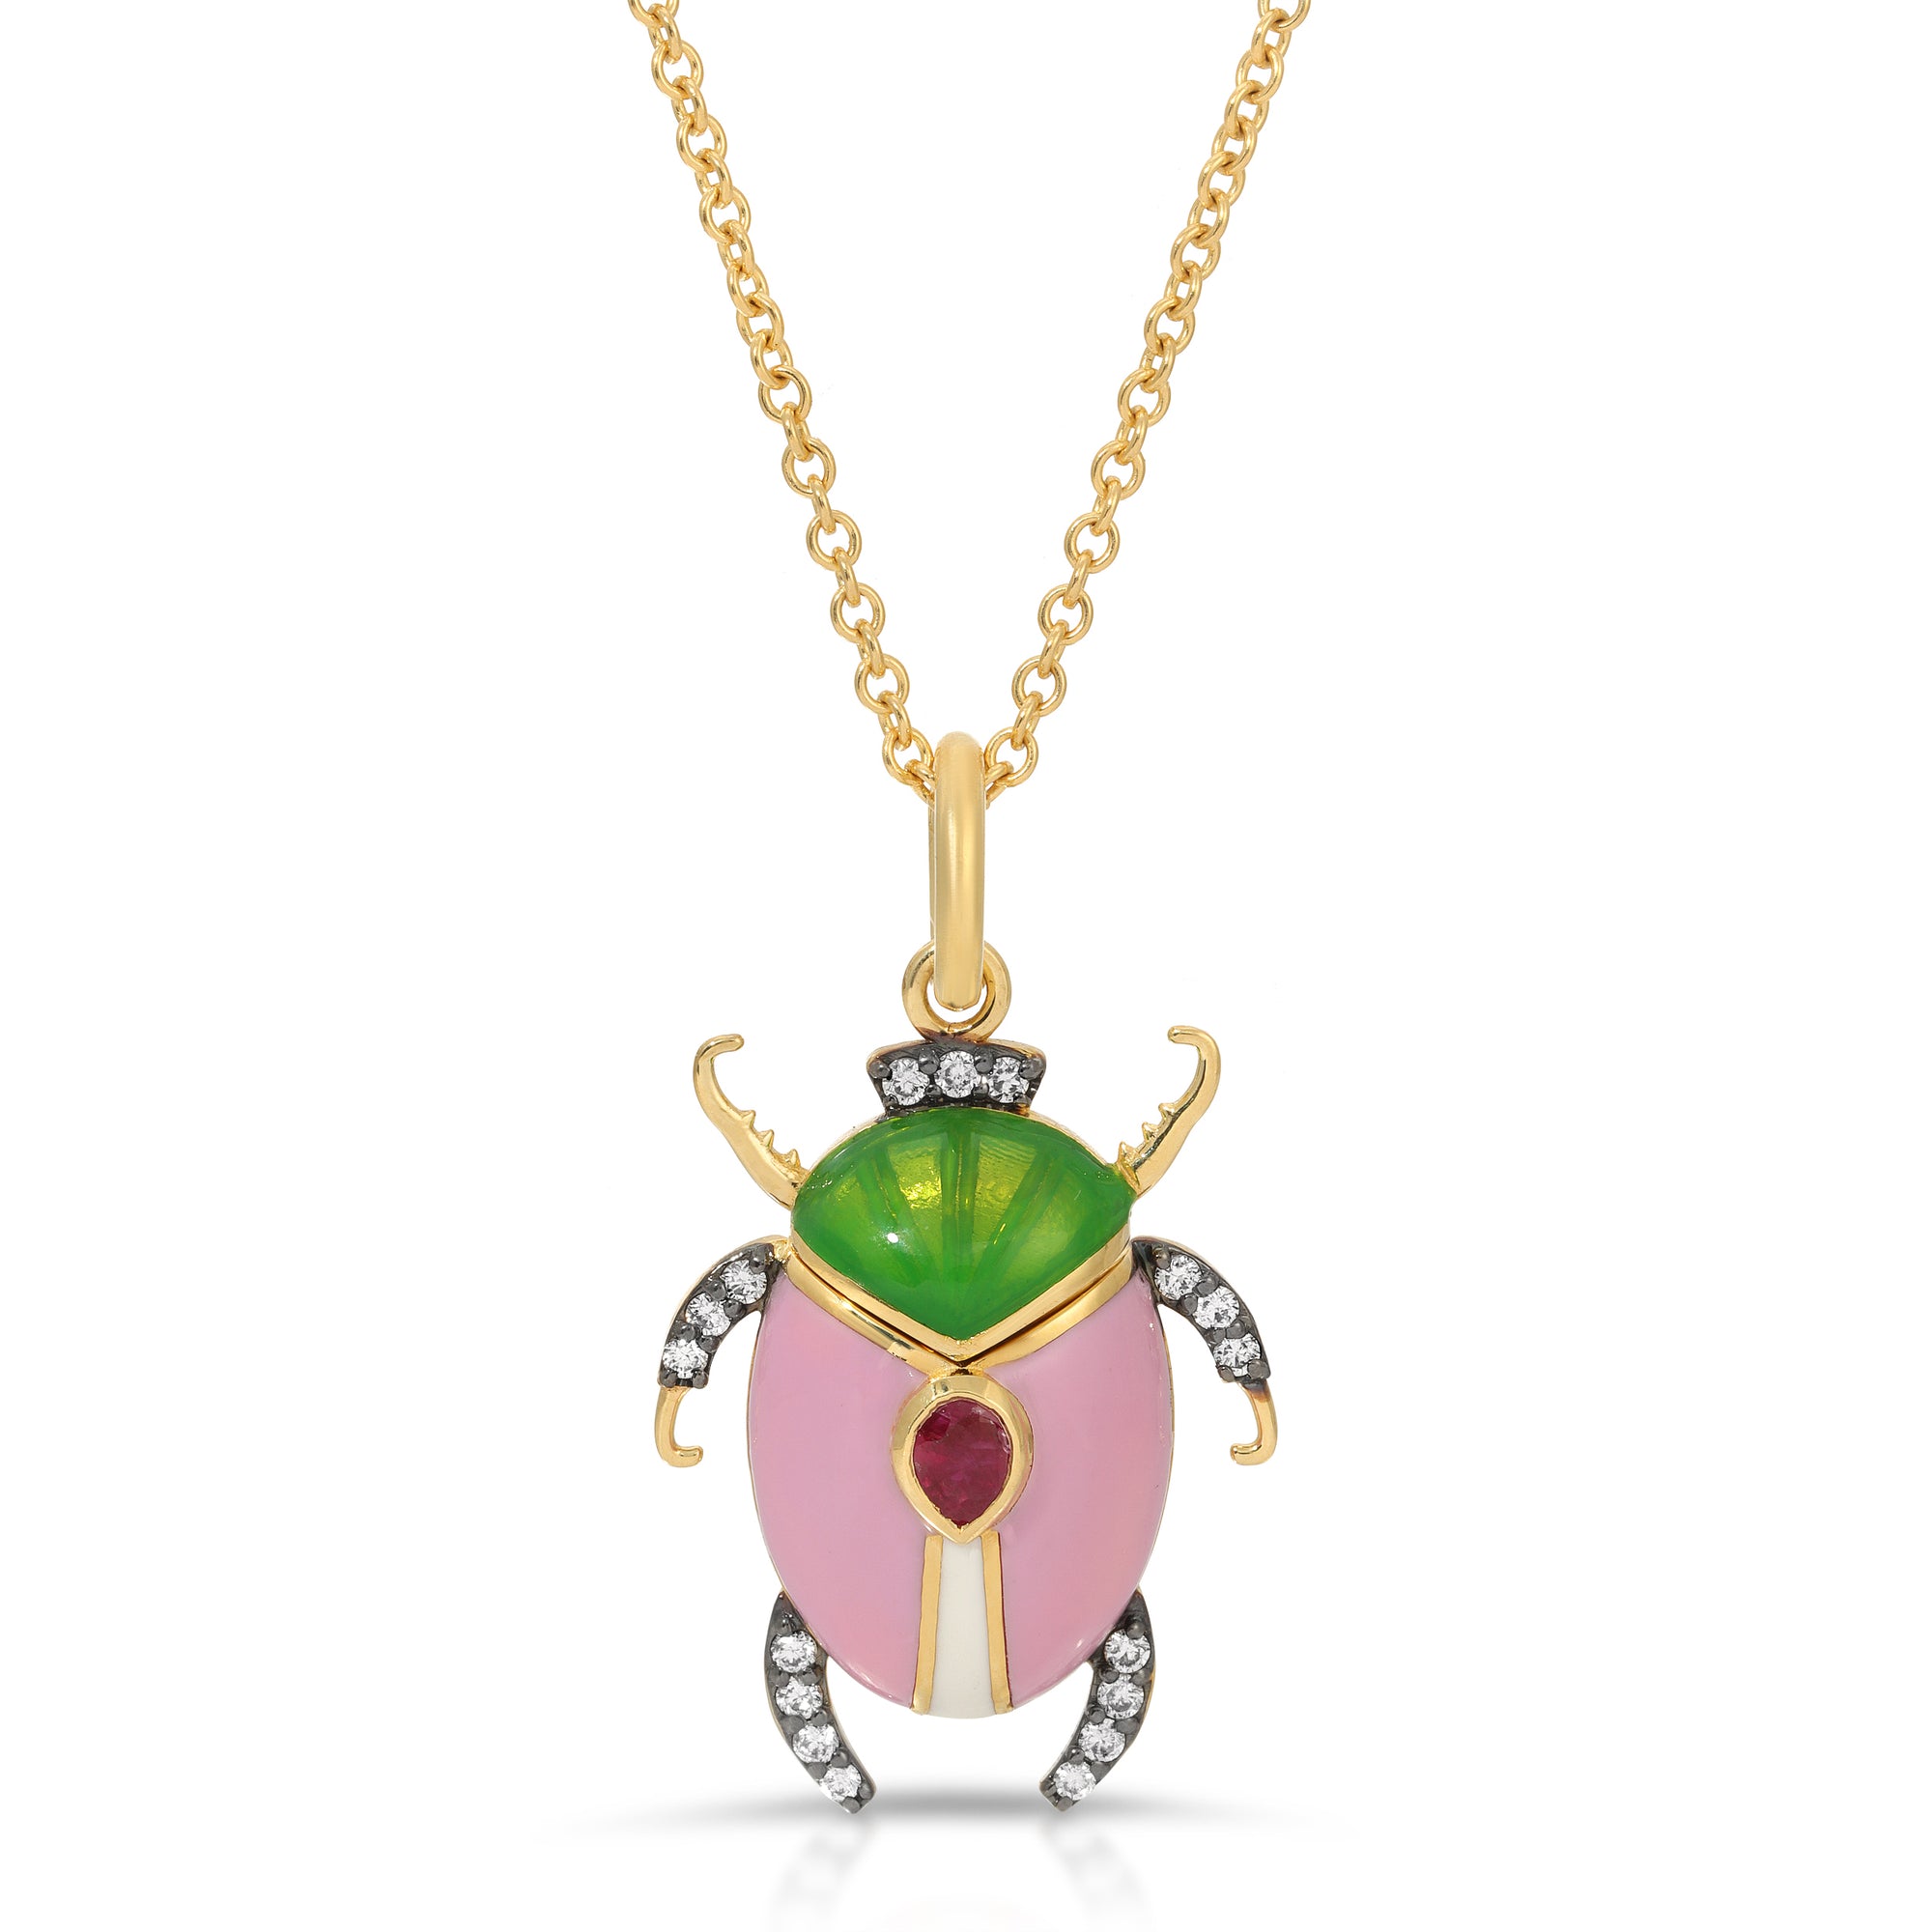 Ruby Enamel Beetle Necklace by Lord Jewelry available at Talisman Collection Fine Jewelers in El Dorado Hills, CA and online. This Ruby Scarab Beetle Pendant Necklace is utterly charming. Crafted in 18k yellow gold, the charm features a beautiful plique-à-jour enamel scarab, accented with a 0.19 cts pear-cut ruby and 0.14 cts of diamonds. 